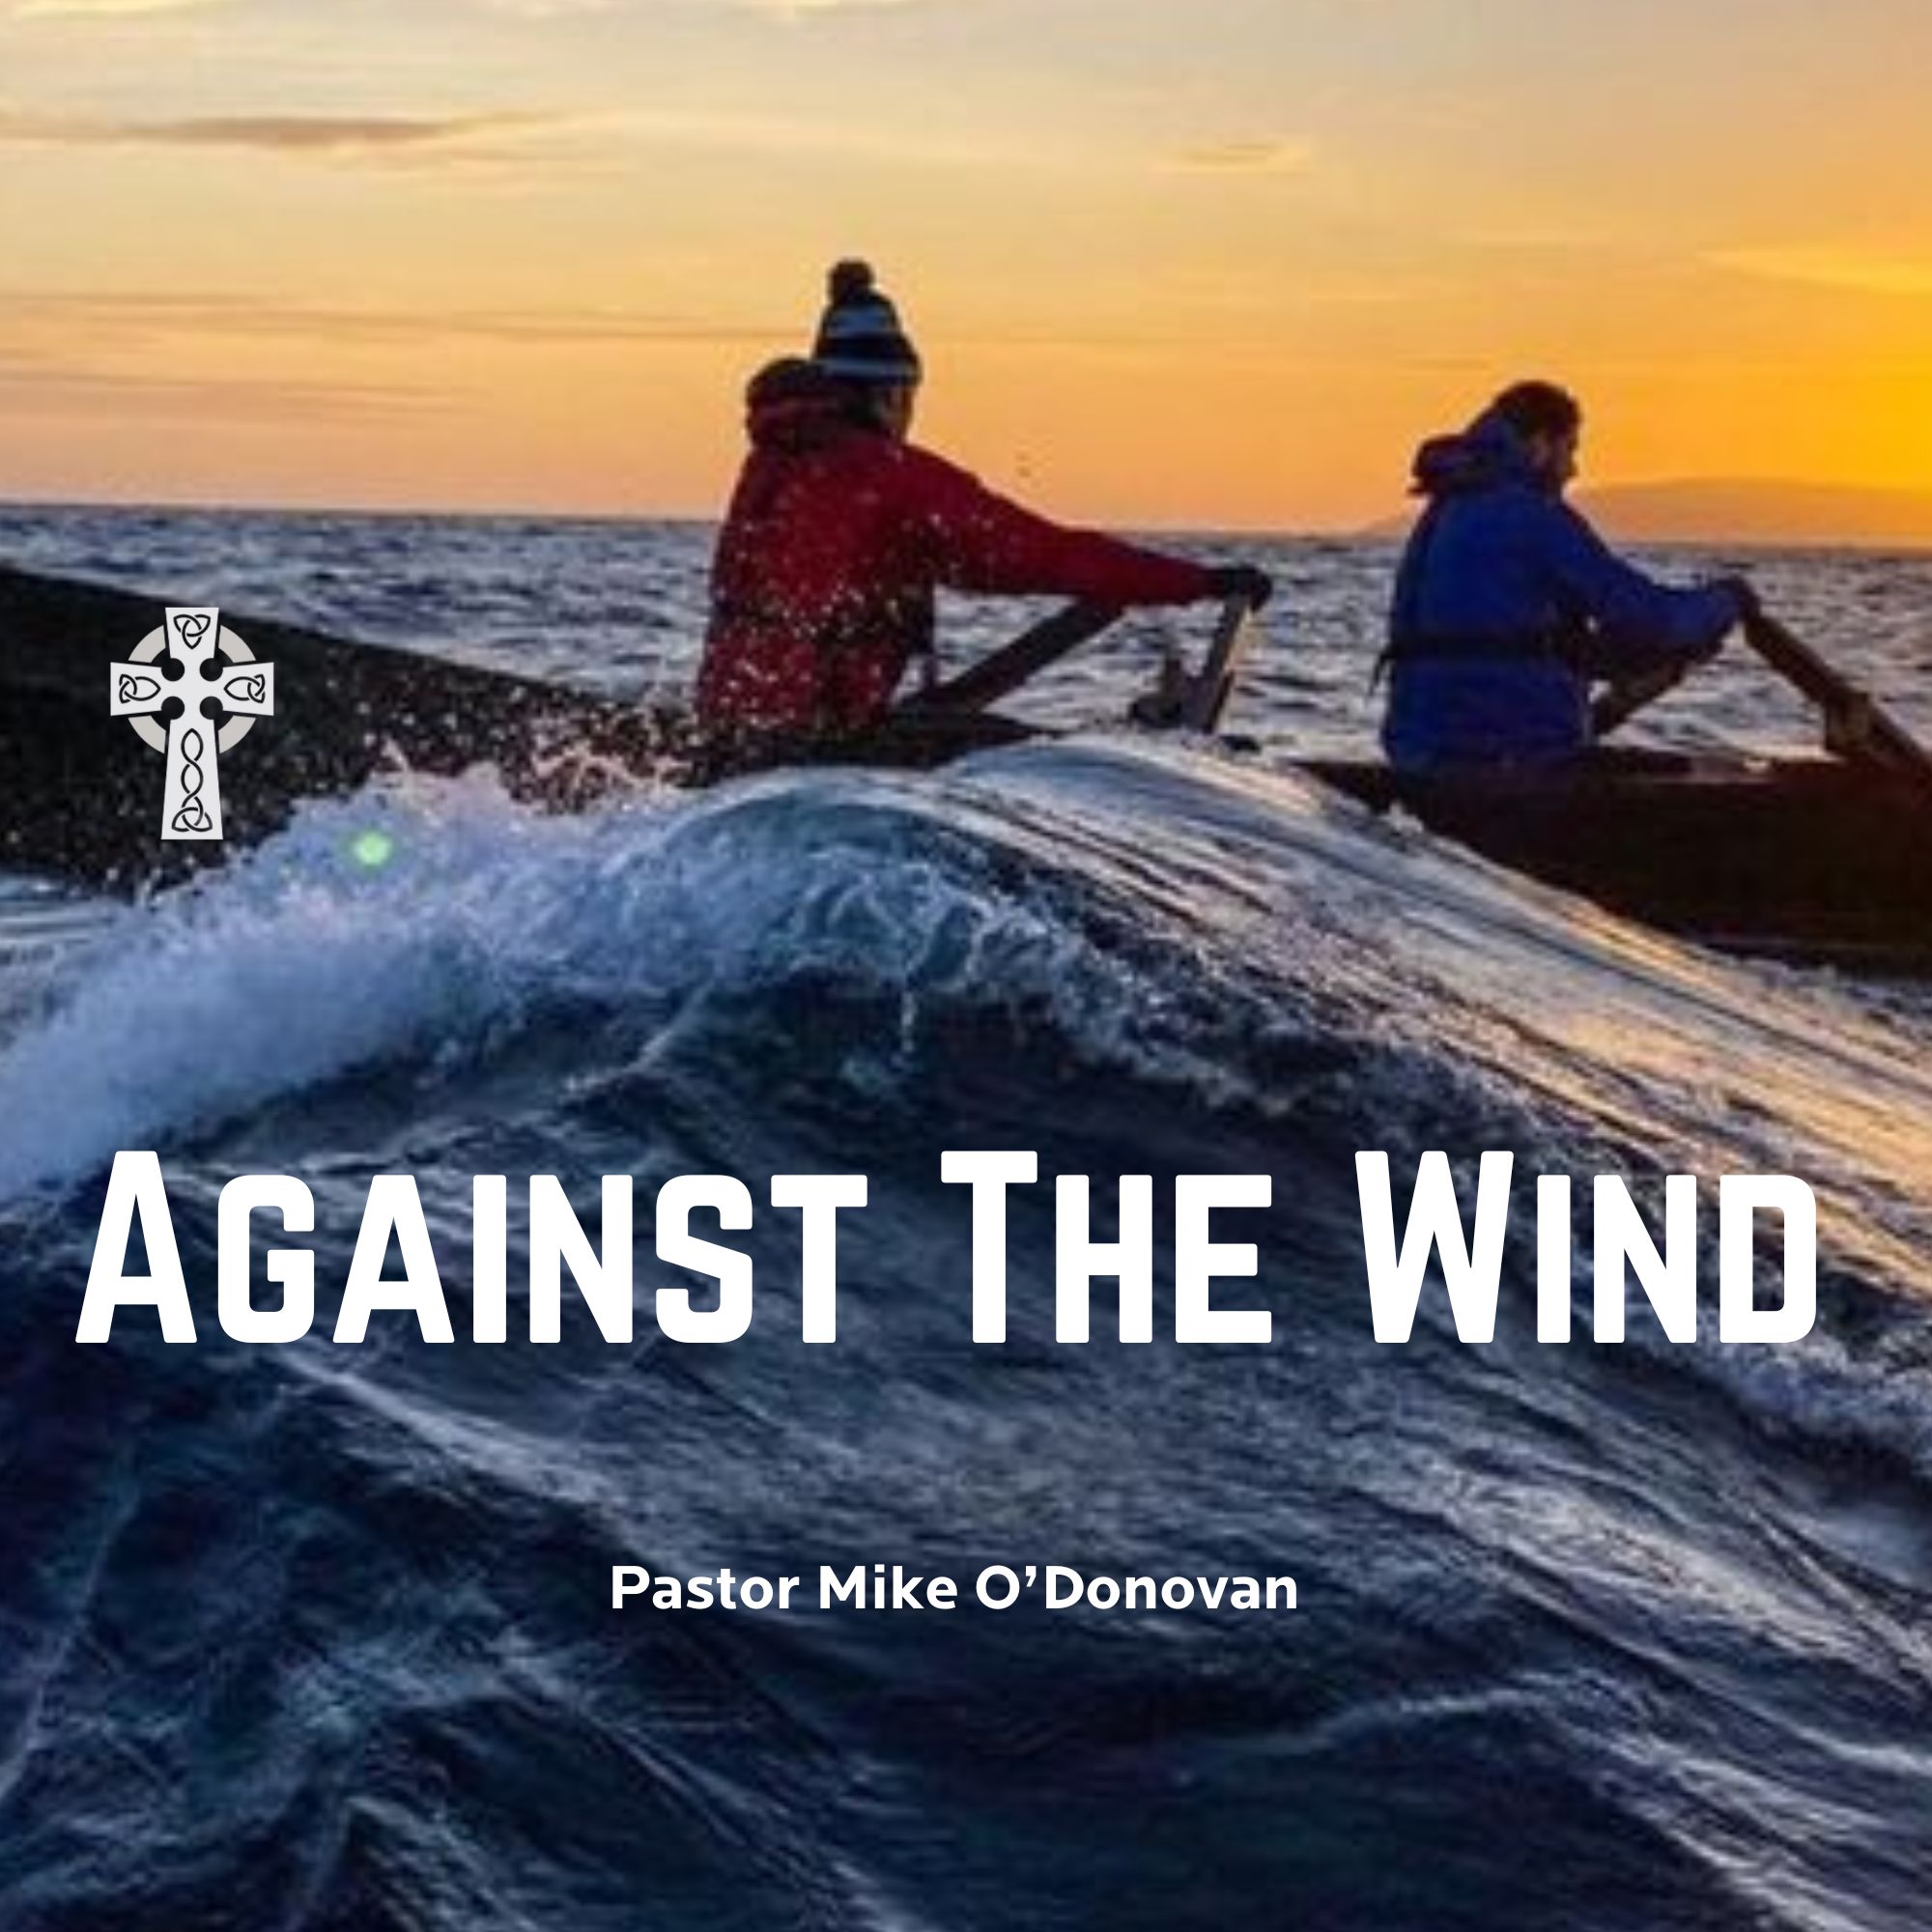 Against the Wind - Pastor Mike O'Donovan